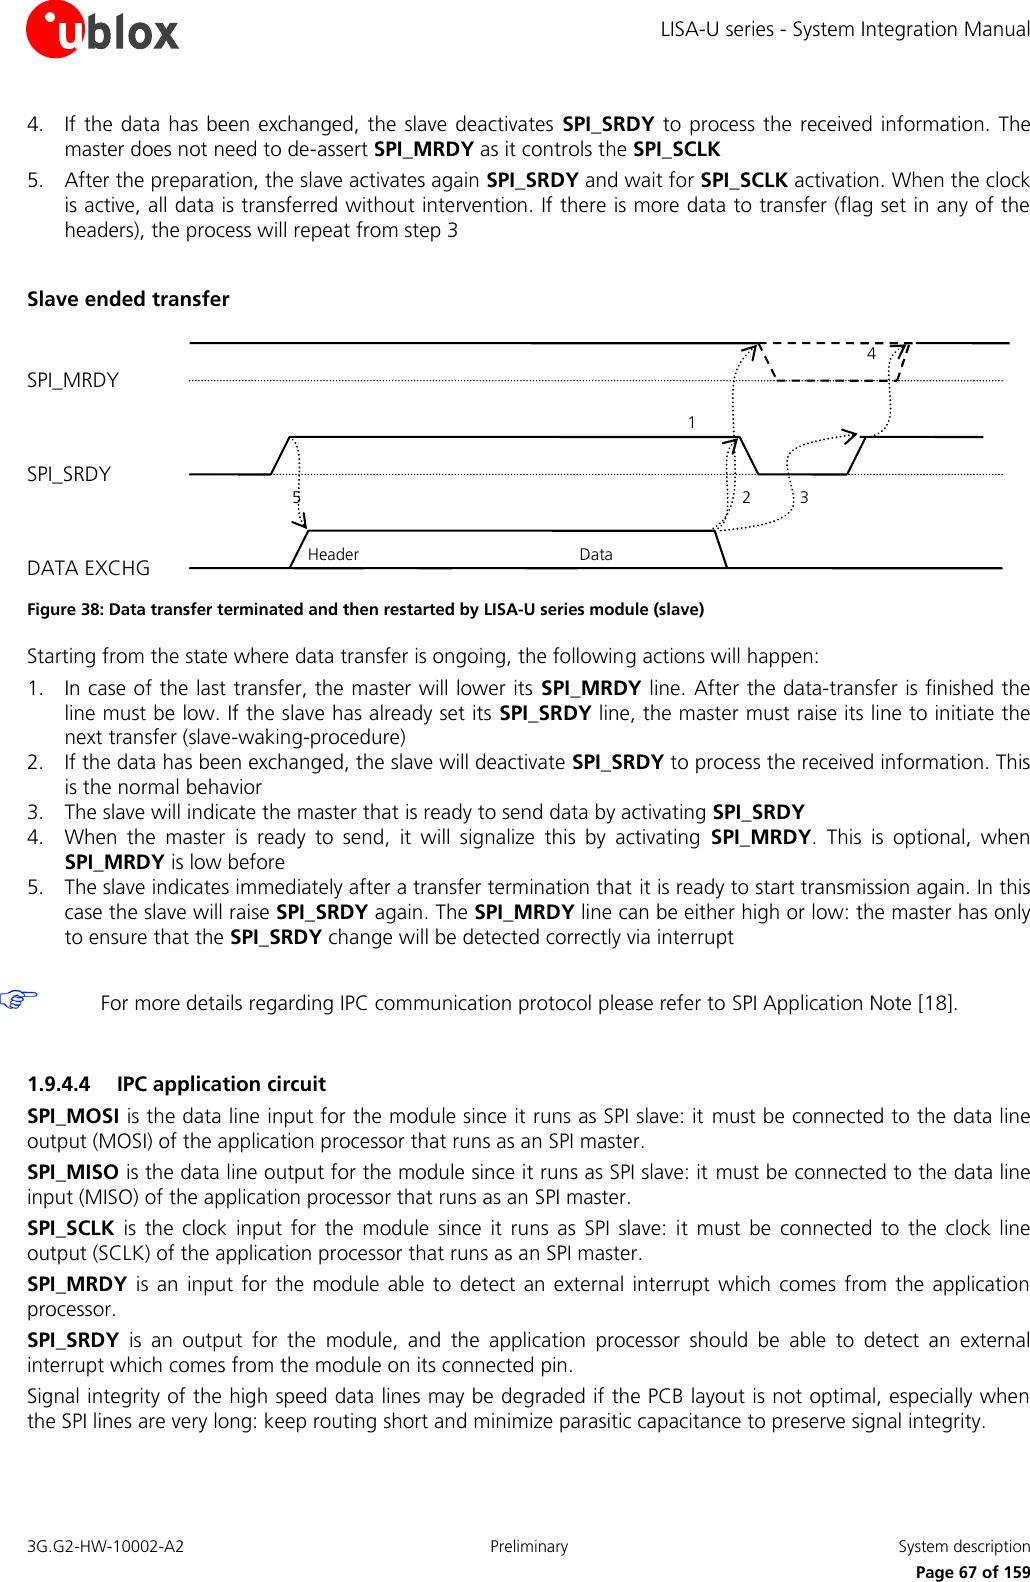 LISA-U series - System Integration Manual 3G.G2-HW-10002-A2  Preliminary  System description      Page 67 of 159 4. If the data  has been exchanged, the slave deactivates  SPI_SRDY to process the  received information. The master does not need to de-assert SPI_MRDY as it controls the SPI_SCLK 5. After the preparation, the slave activates again SPI_SRDY and wait for SPI_SCLK activation. When the clock is active, all data is transferred without intervention. If there is more data to transfer (flag set in any of the headers), the process will repeat from step 3  Slave ended transfer  Figure 38: Data transfer terminated and then restarted by LISA-U series module (slave) Starting from the state where data transfer is ongoing, the following actions will happen: 1. In case of the last transfer, the master will lower its SPI_MRDY line. After the data-transfer is finished the line must be low. If the slave has already set its SPI_SRDY line, the master must raise its line to initiate the next transfer (slave-waking-procedure) 2. If the data has been exchanged, the slave will deactivate SPI_SRDY to process the received information. This is the normal behavior 3. The slave will indicate the master that is ready to send data by activating SPI_SRDY 4. When  the  master  is  ready  to  send,  it  will  signalize  this  by  activating  SPI_MRDY.  This  is  optional,  when SPI_MRDY is low before 5. The slave indicates immediately after a transfer termination that it is ready to start transmission again. In this case the slave will raise SPI_SRDY again. The SPI_MRDY line can be either high or low: the master has only to ensure that the SPI_SRDY change will be detected correctly via interrupt   For more details regarding IPC communication protocol please refer to SPI Application Note [18].  1.9.4.4 IPC application circuit SPI_MOSI is the data line input for the module since it runs as SPI slave: it  must be connected to the data line output (MOSI) of the application processor that runs as an SPI master. SPI_MISO is the data line output for the module since it runs as SPI slave: it must be connected to the data line input (MISO) of the application processor that runs as an SPI master. SPI_SCLK  is  the clock  input  for the  module  since  it  runs as  SPI  slave:  it  must  be  connected  to the  clock  line output (SCLK) of the application processor that runs as an SPI master. SPI_MRDY  is an  input for the  module able  to detect an external interrupt which  comes  from the  application processor. SPI_SRDY  is  an  output  for  the  module,  and  the  application  processor  should  be  able  to  detect  an  external interrupt which comes from the module on its connected pin. Signal integrity of the high speed data lines may be degraded if the PCB layout is not optimal, especially when the SPI lines are very long: keep routing short and minimize parasitic capacitance to preserve signal integrity.  SPI_MRDY SPI_SRDY DATA EXCHG 5 2 1 Header Data 3 4 